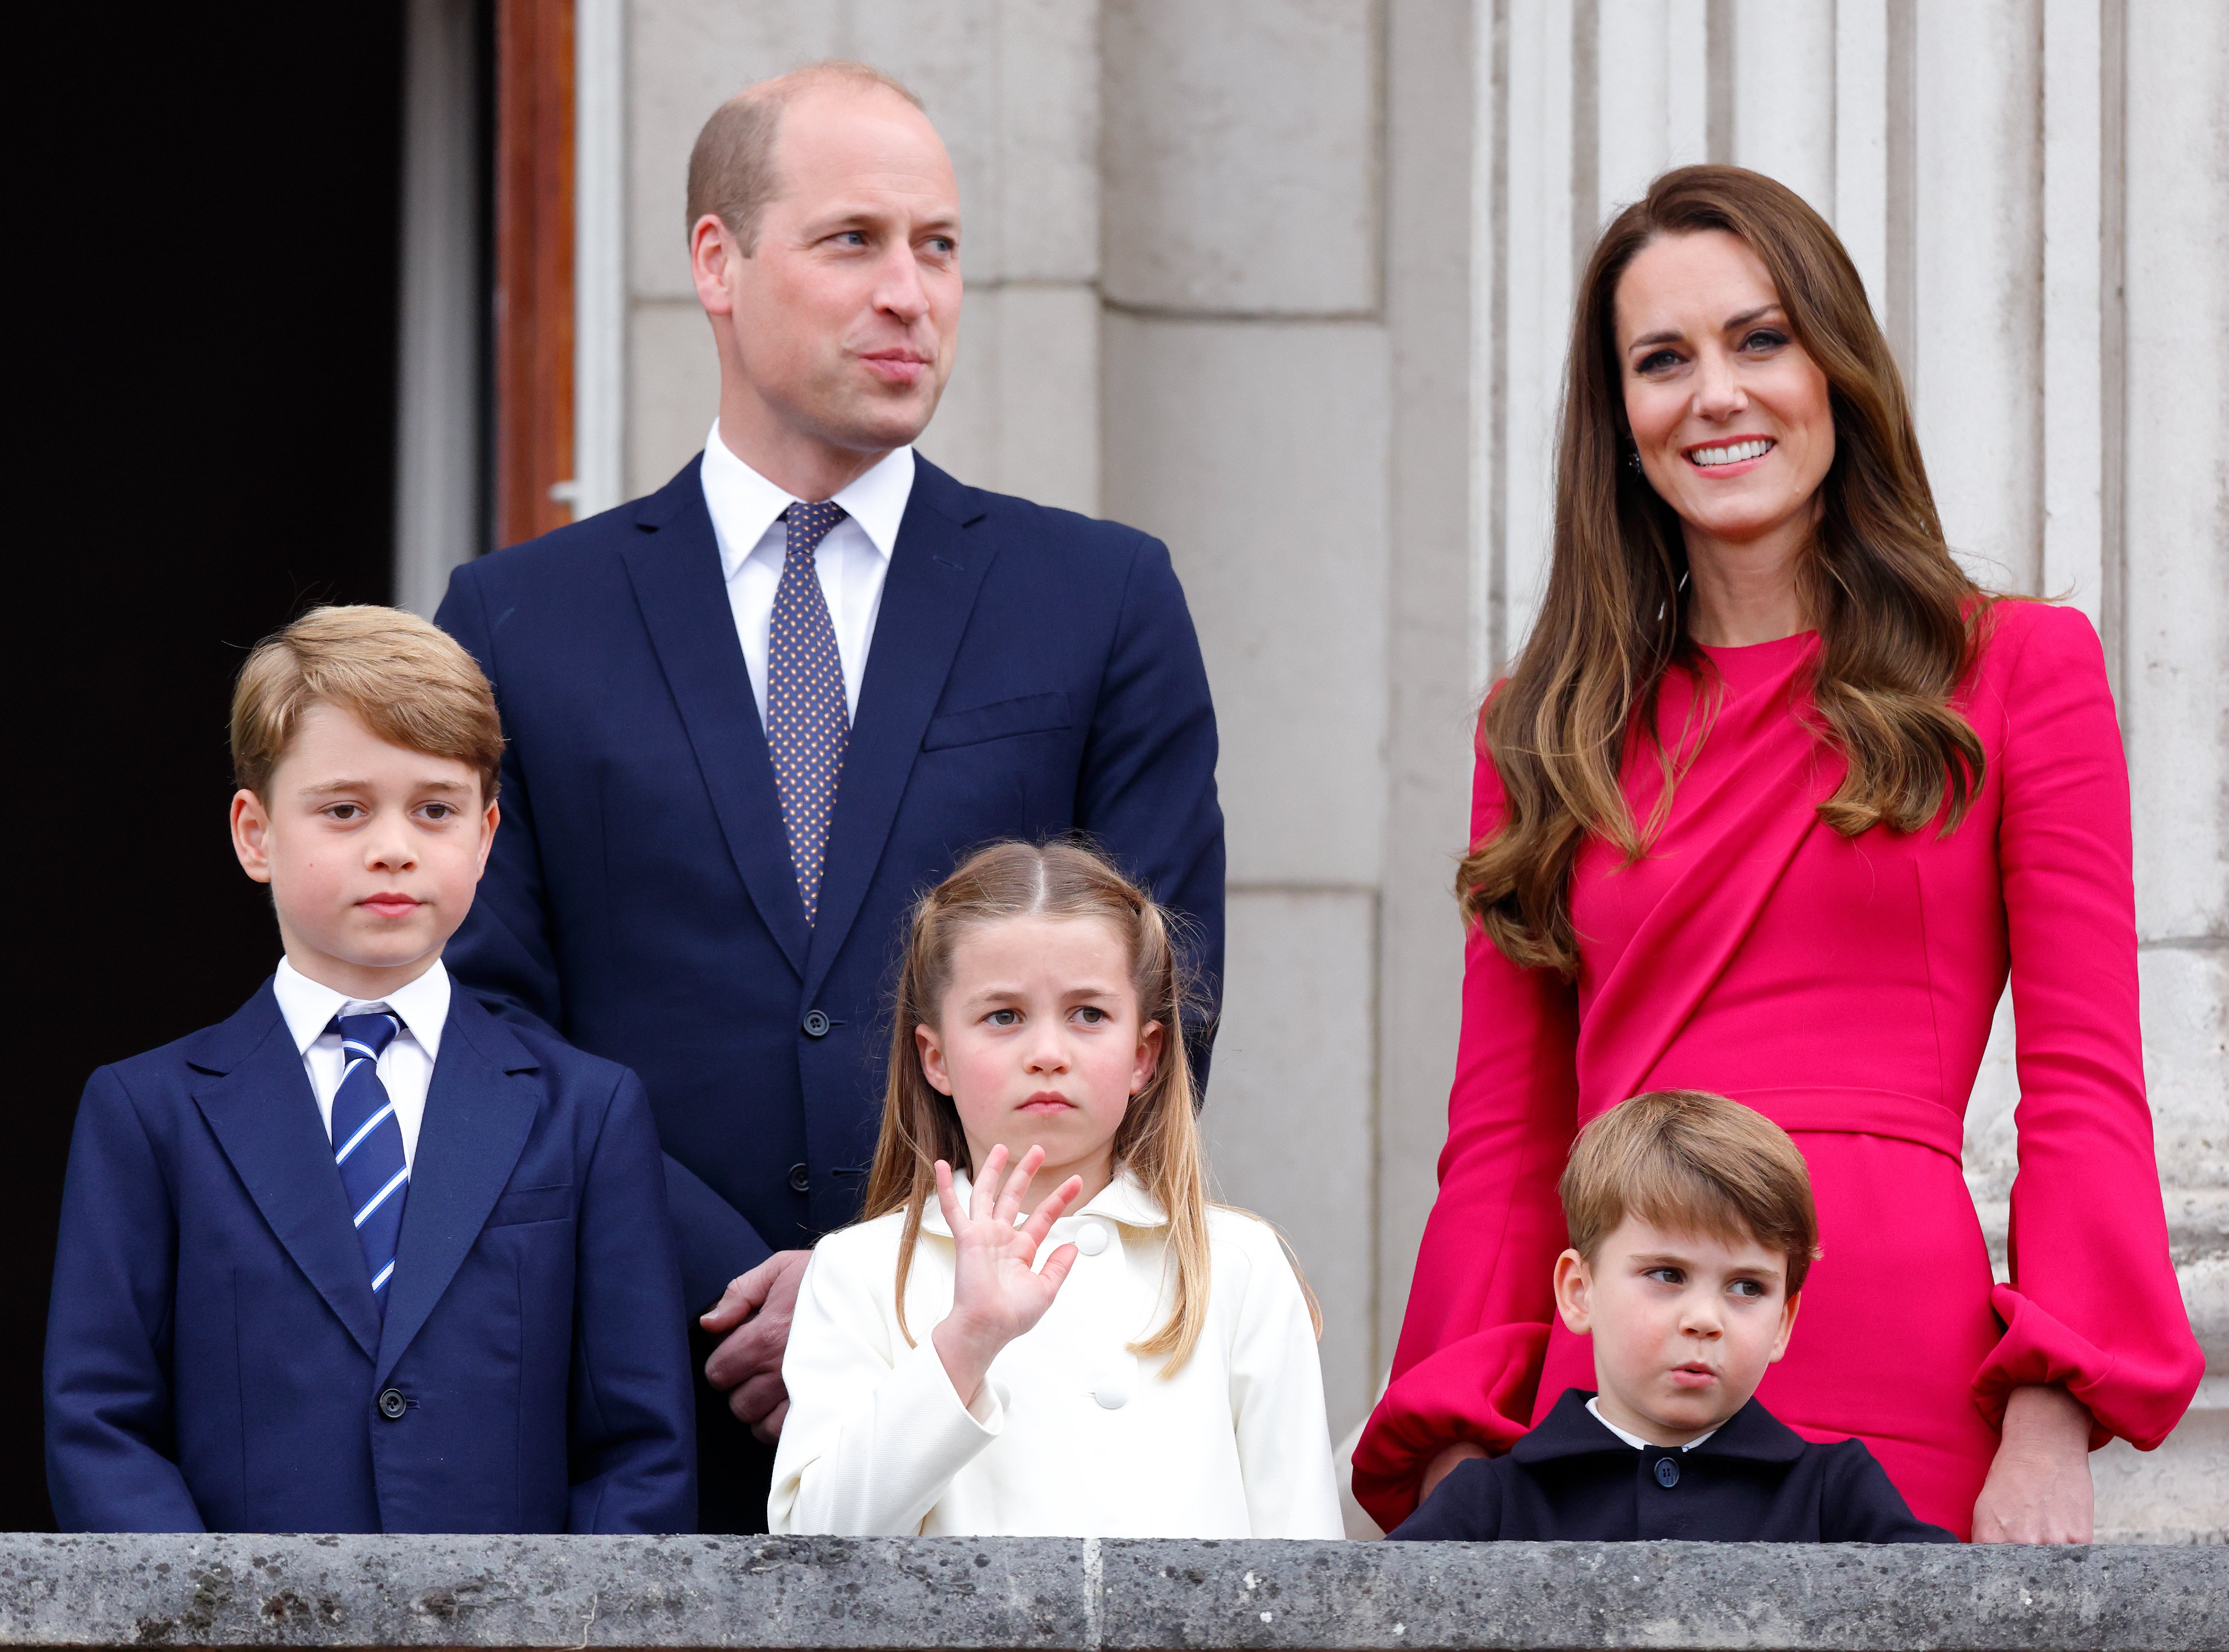 Prince George of Cambridge, Prince William, Duke of Cambridge, Princess Charlotte of Cambridge, Prince Louis of Cambridge and Catherine, Duchess of Cambridge at Buckingham Palace on June 5, 2022 in London, England. | Source: Getty Images